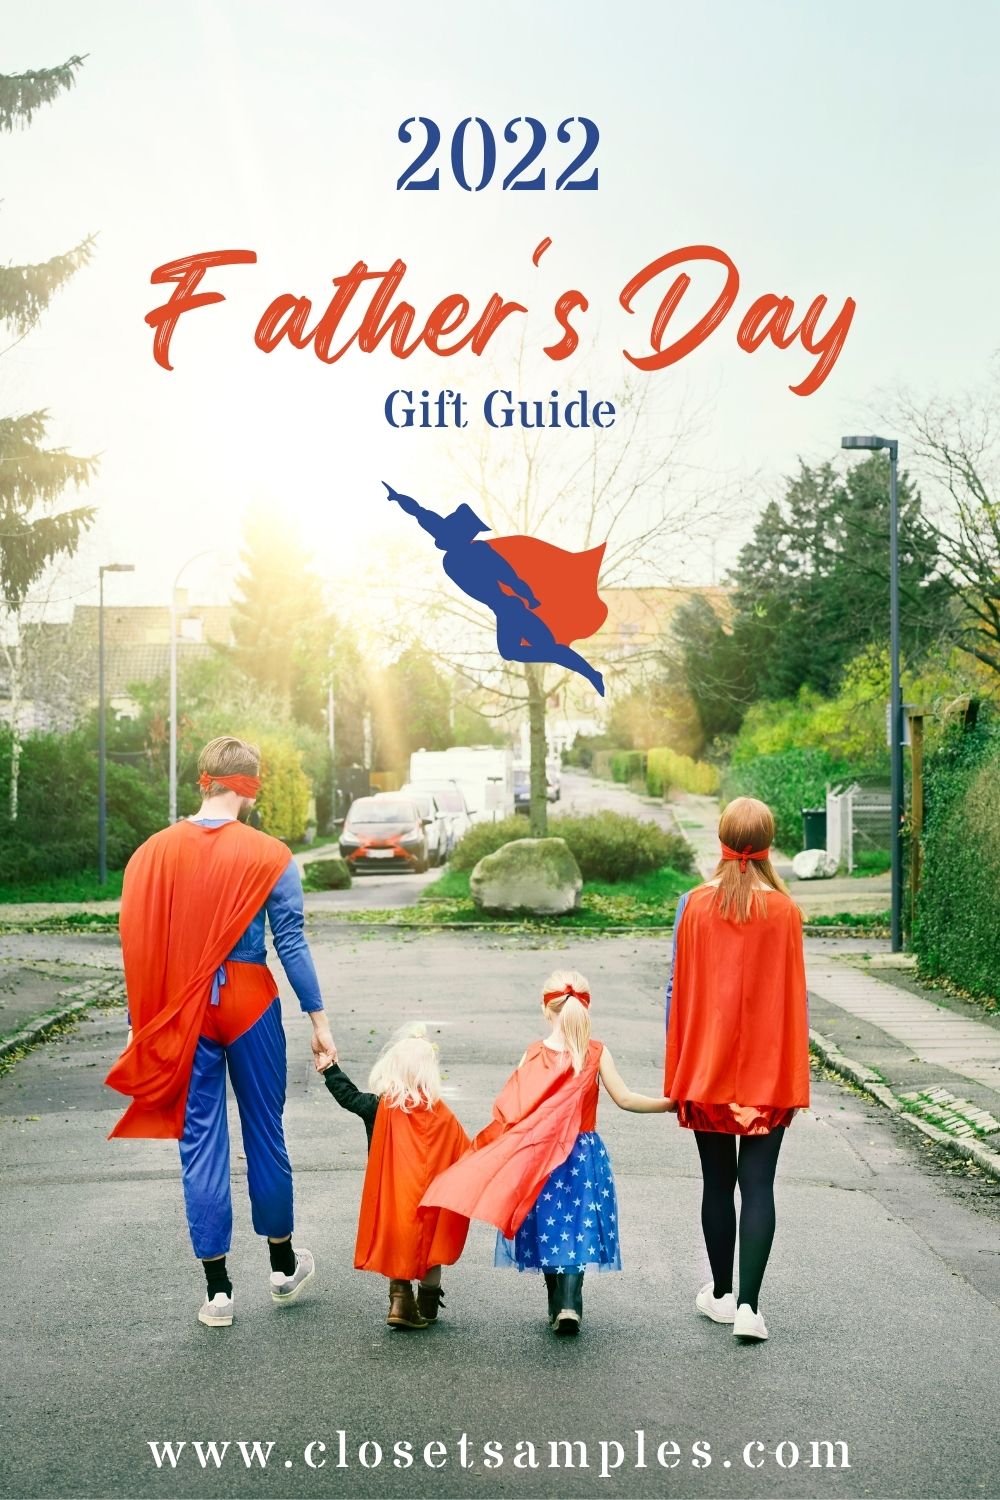 Fathers Day 2022 Gift Guide Gift Ideas for Dad closetsamples Pinterest